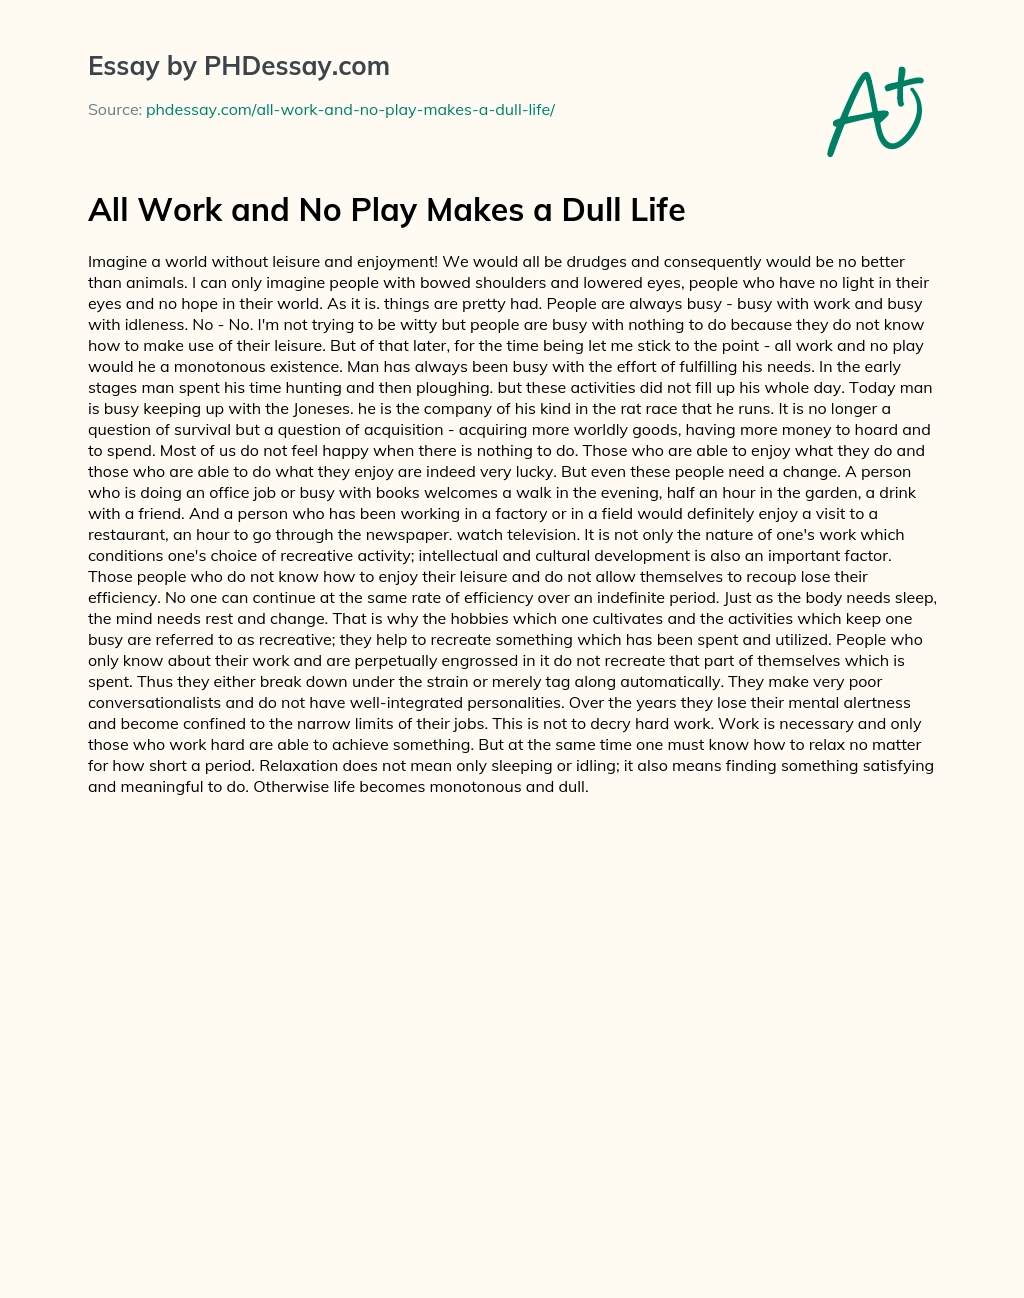 All Work and No Play Makes a Dull Life essay